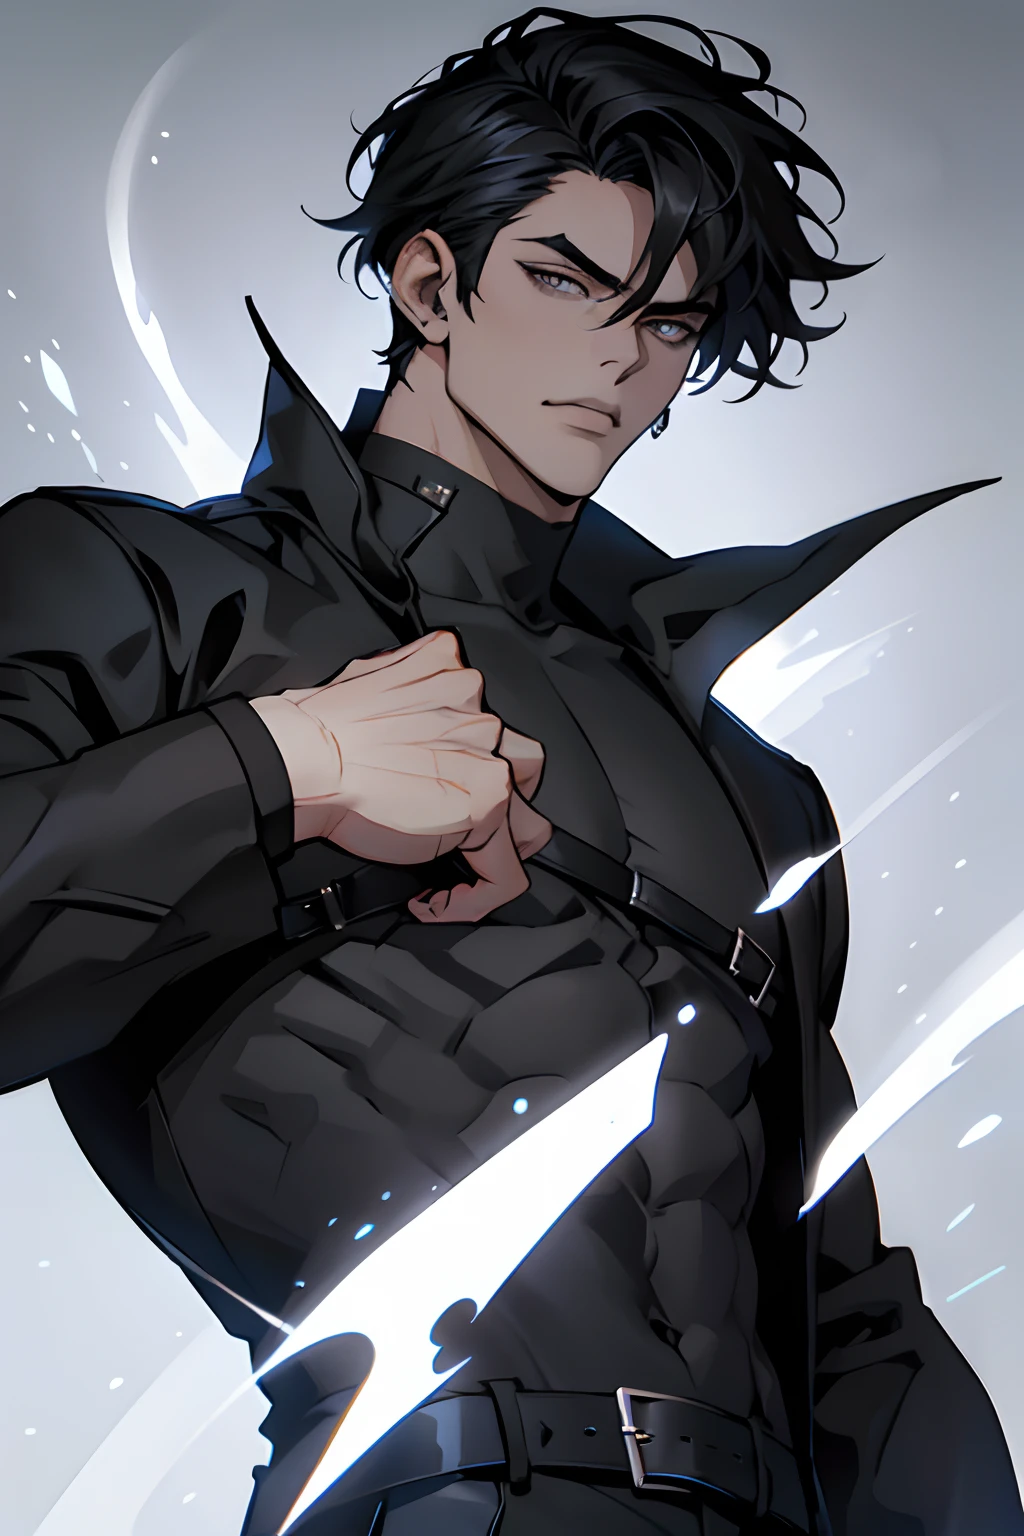 Manhwa Arte Europeo, 25 years old man, Messy headboard hair, Jet black hair, piercing eyes, gray iris, thick eyebrows, Wearing black coat with demonic skull logo, razor-sharp jawline, glare, Cold and mysterious character, 8k, Detailed features, very handsome